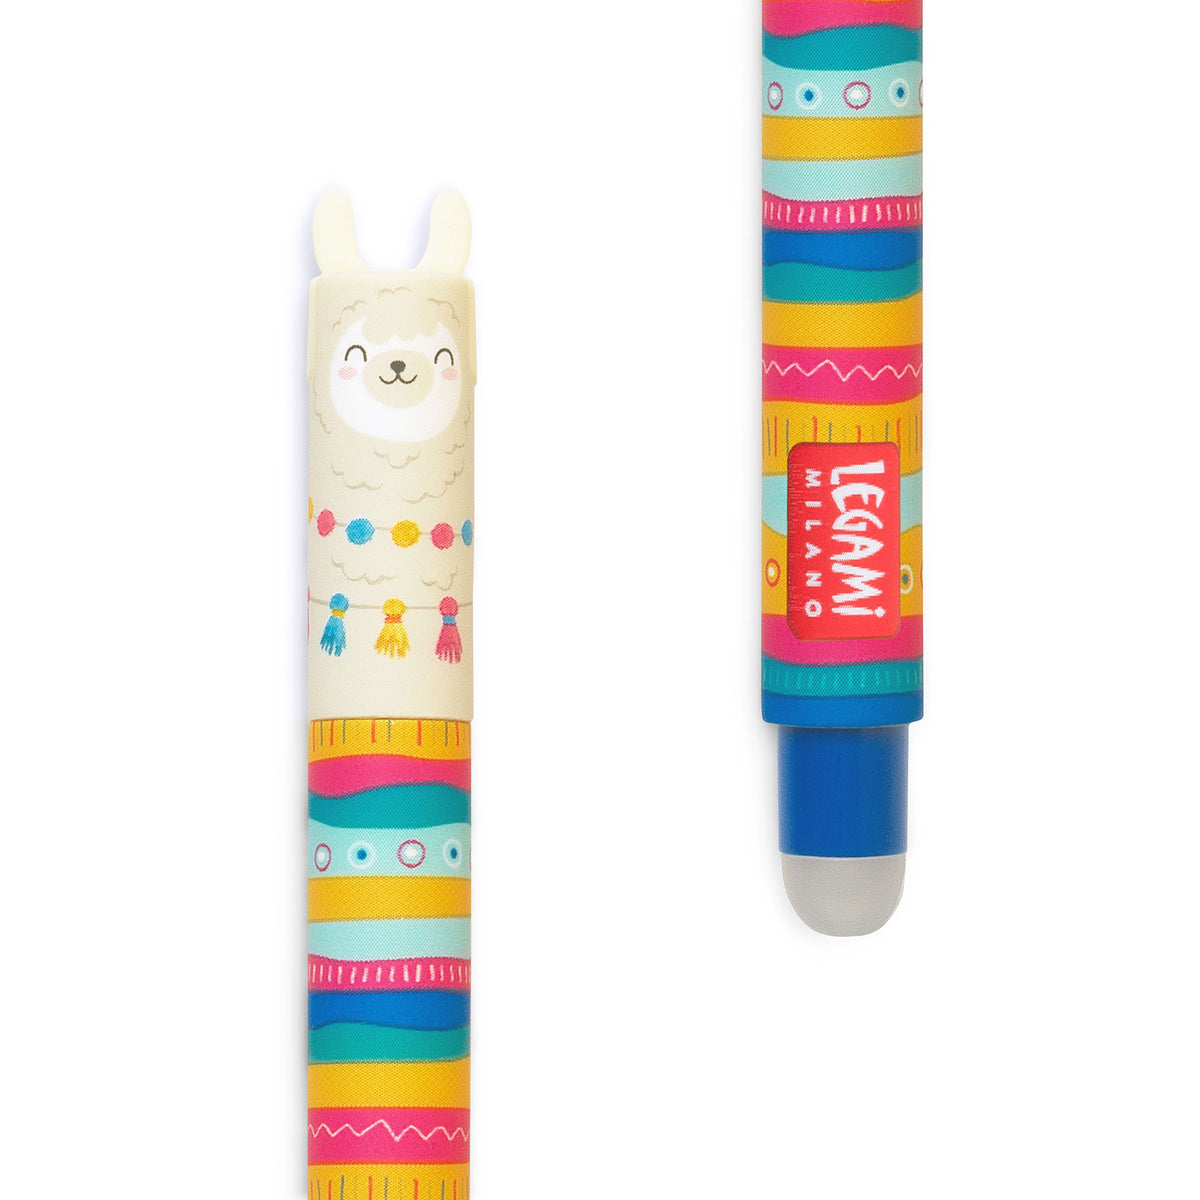 Image of an erasable pen lid and rubber in the shape of a llama.